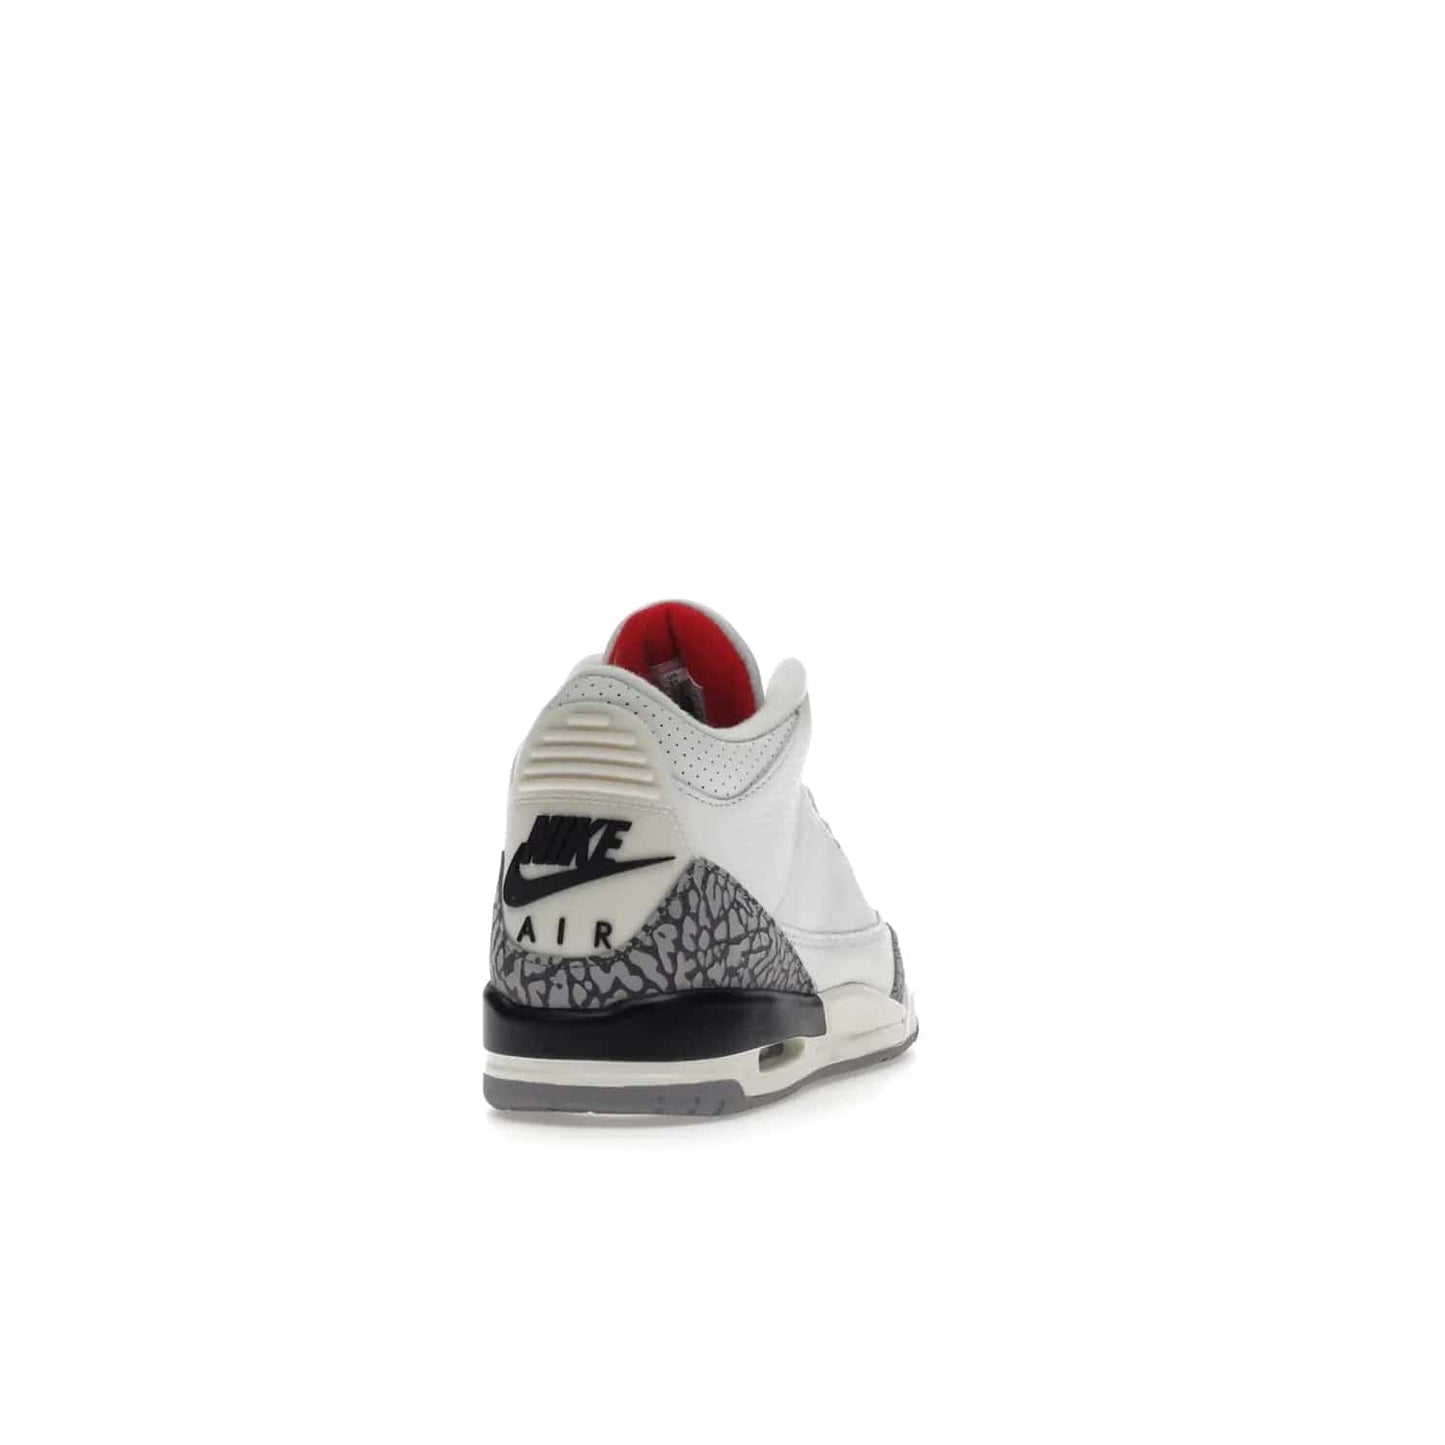 Jordan 3 Retro White Cement Reimagined (GS) - Image 30 - Only at www.BallersClubKickz.com - Grab the perfect blend of modern design and classic style with the Jordan 3 Retro White Cement Reimagined (GS). Features Summit White, Fire Red, Black, and Cement Grey colorway, iconic Jordan logo embroidered on the tongue, and “Nike Air” branding. Limited availability, get your pair before March 11th 2023.